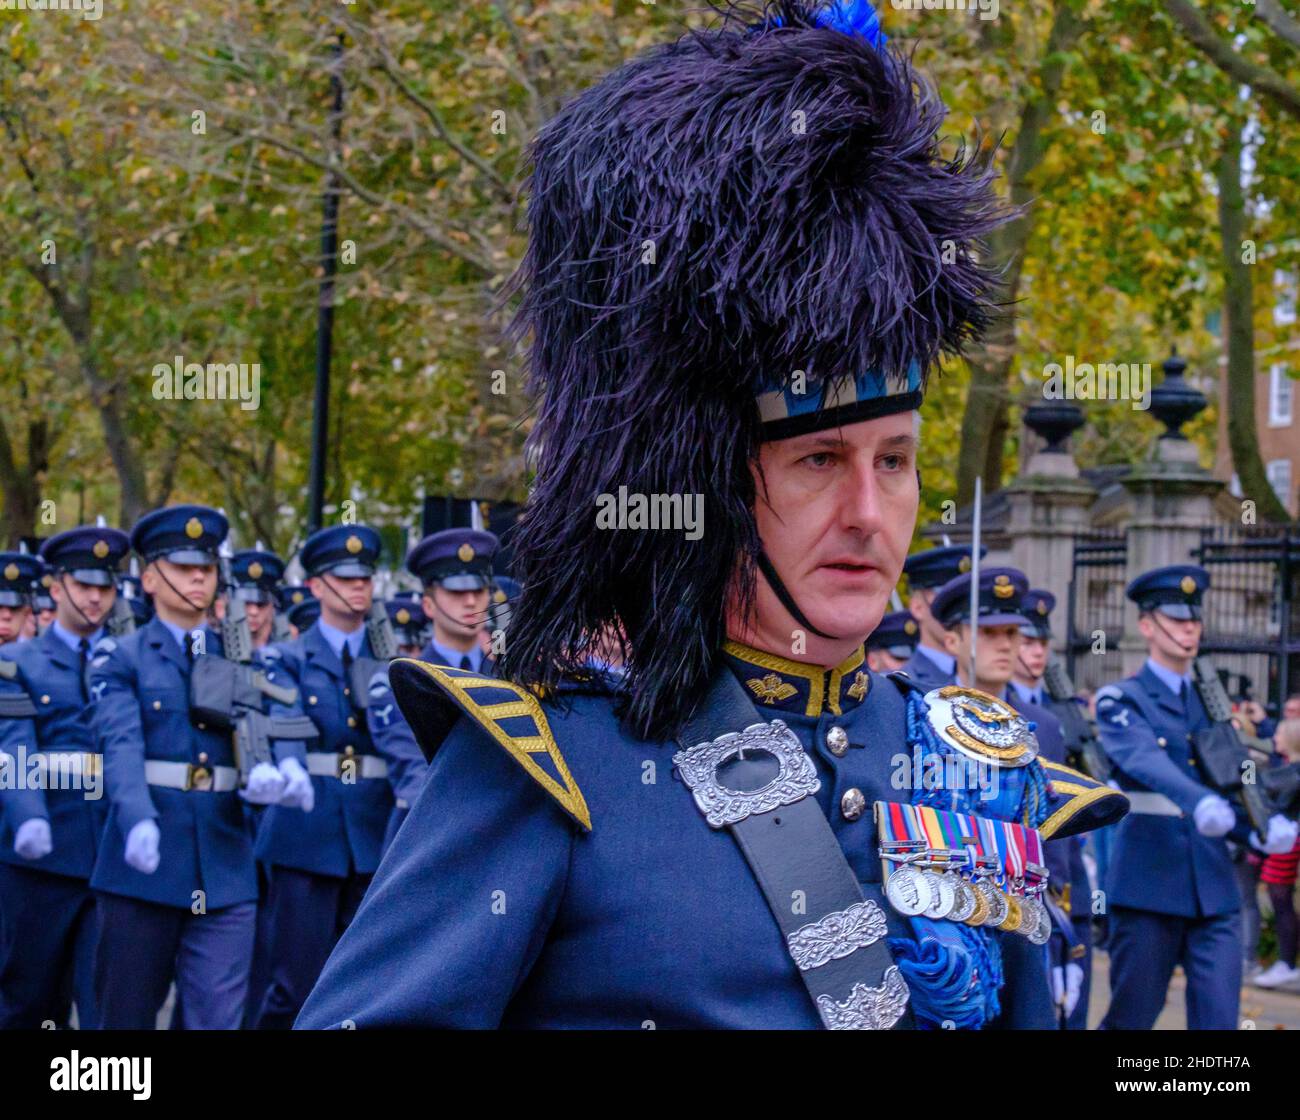 The Queen’s Colour Squadron, Royal Air Force bei der Lord Mayor’s Show 2021 Victoria Embankment, London, England. Stockfoto